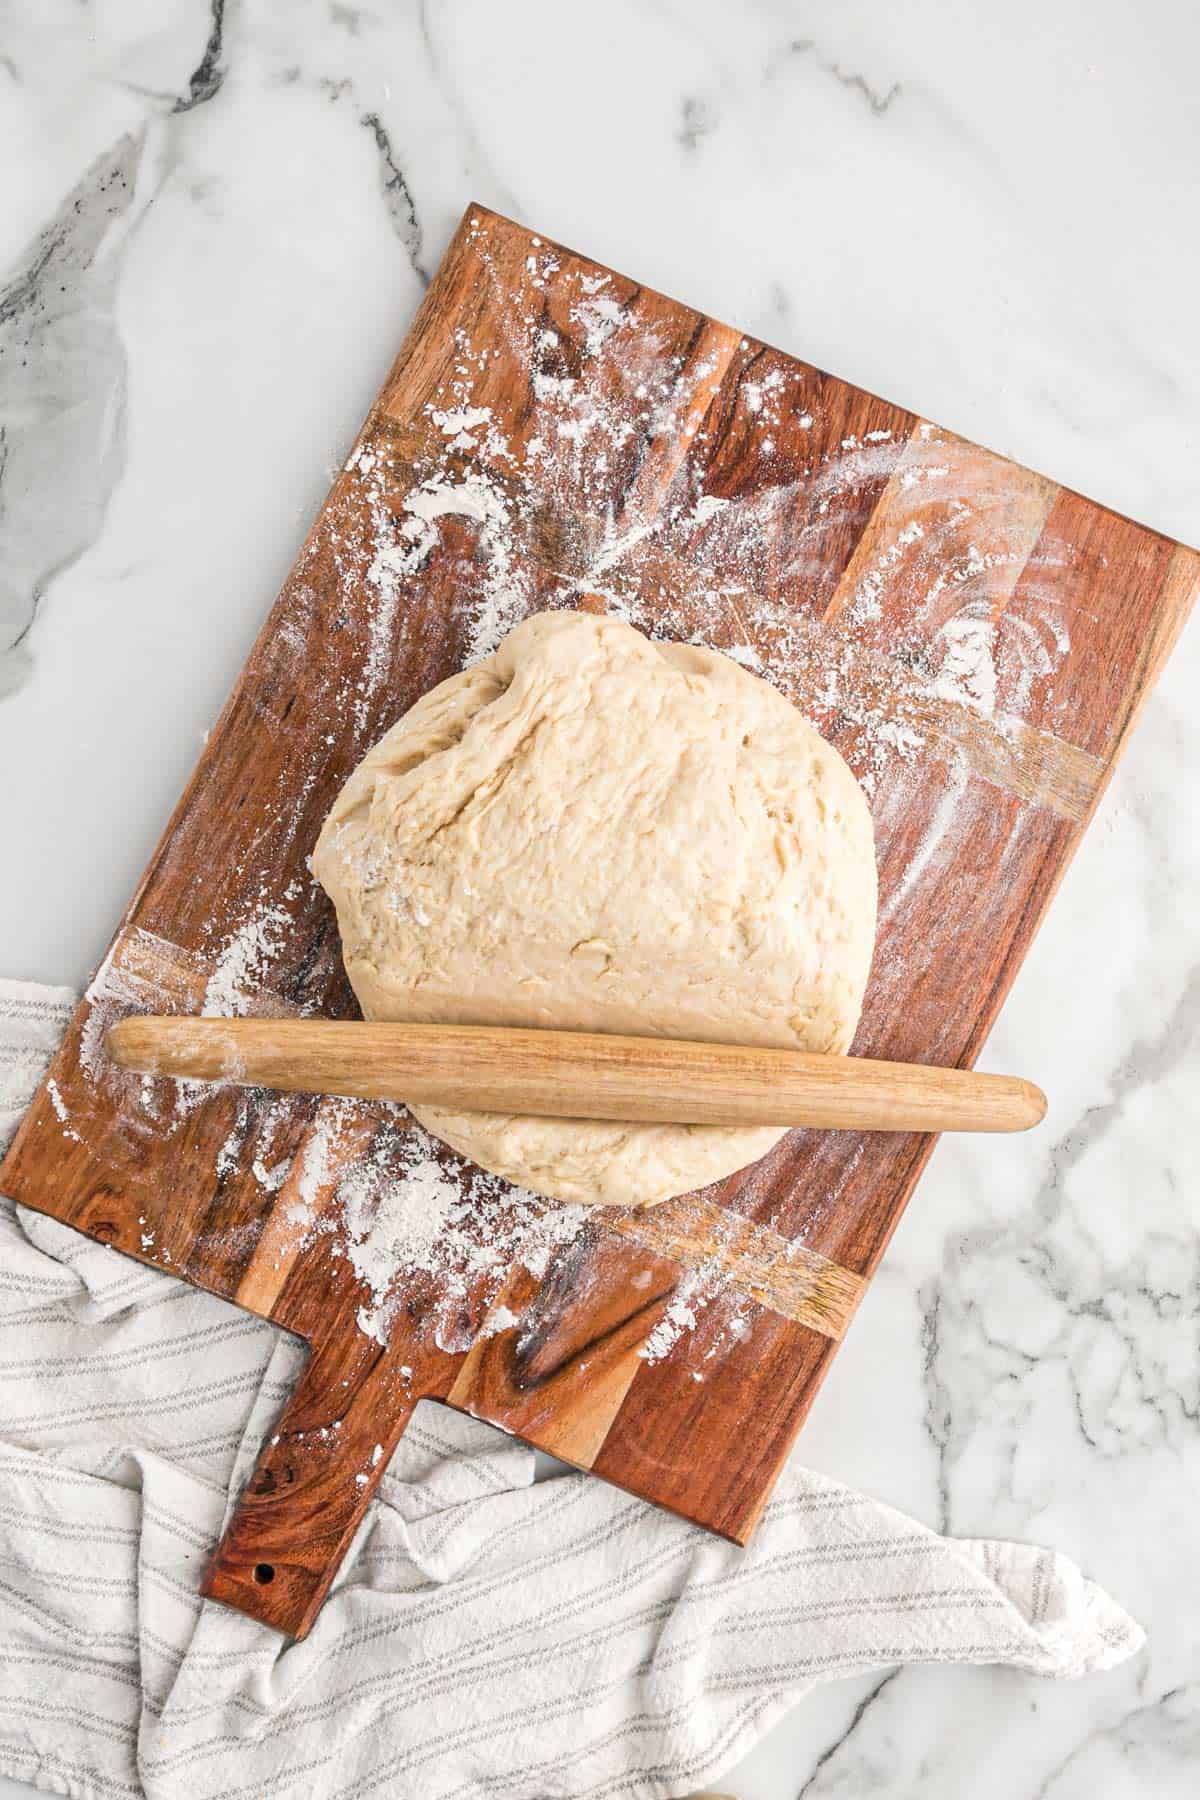 Dough on a well floured surface with a rolling pin.